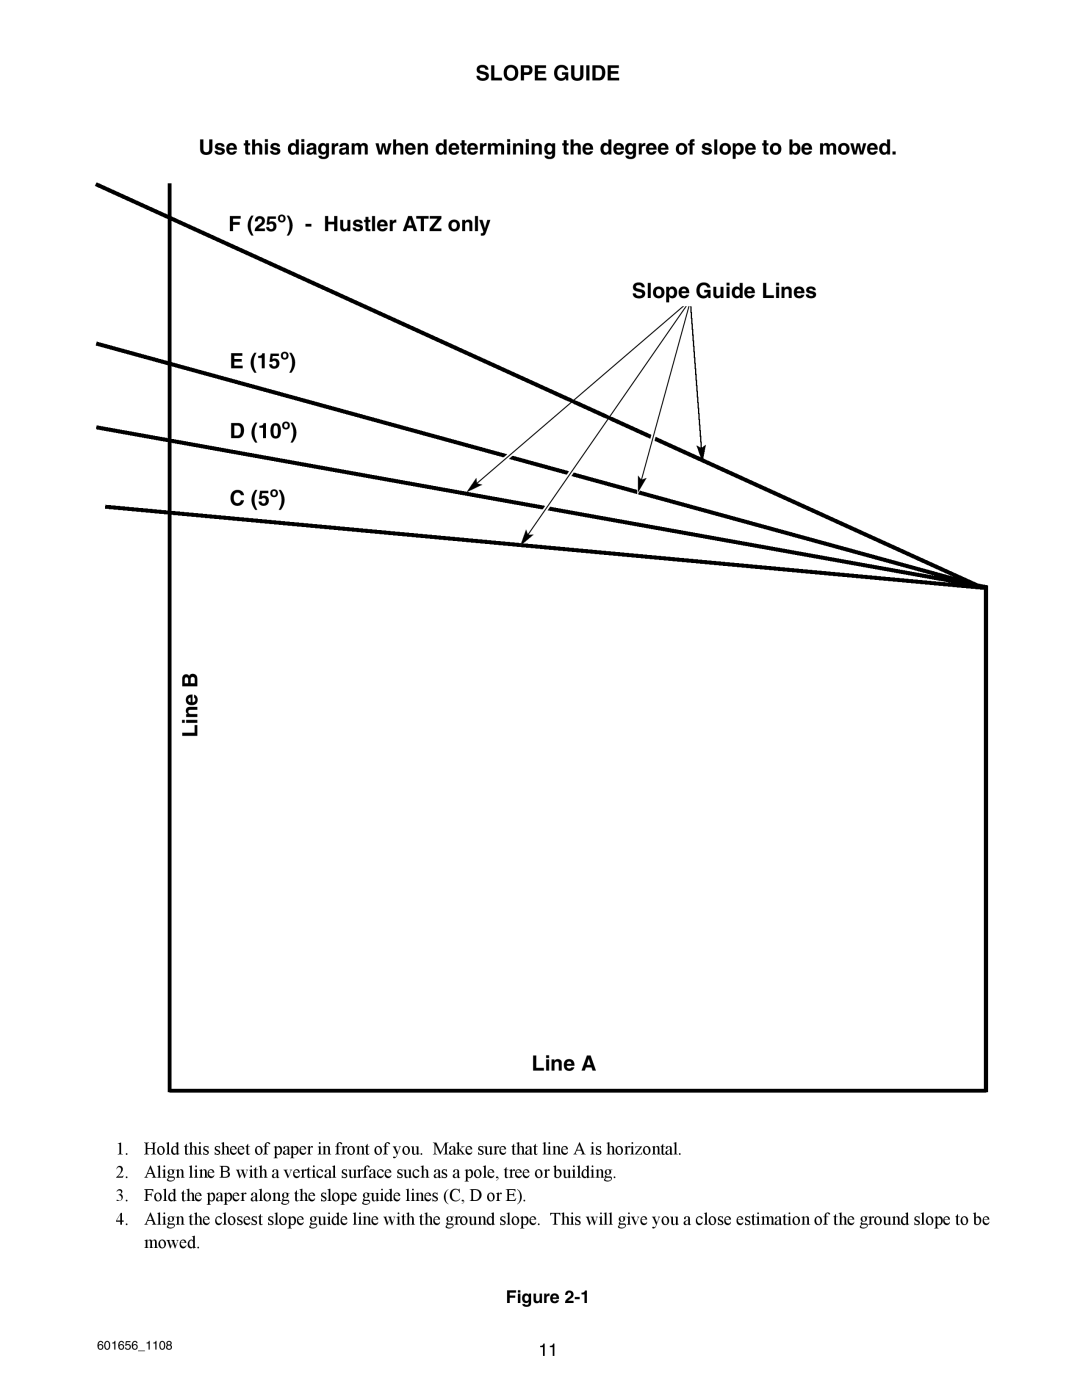 Hustler Turf 927566, 927053, 927848 Slope Guide, Use this diagram when determining the degree of slope to be mowed, Line A 